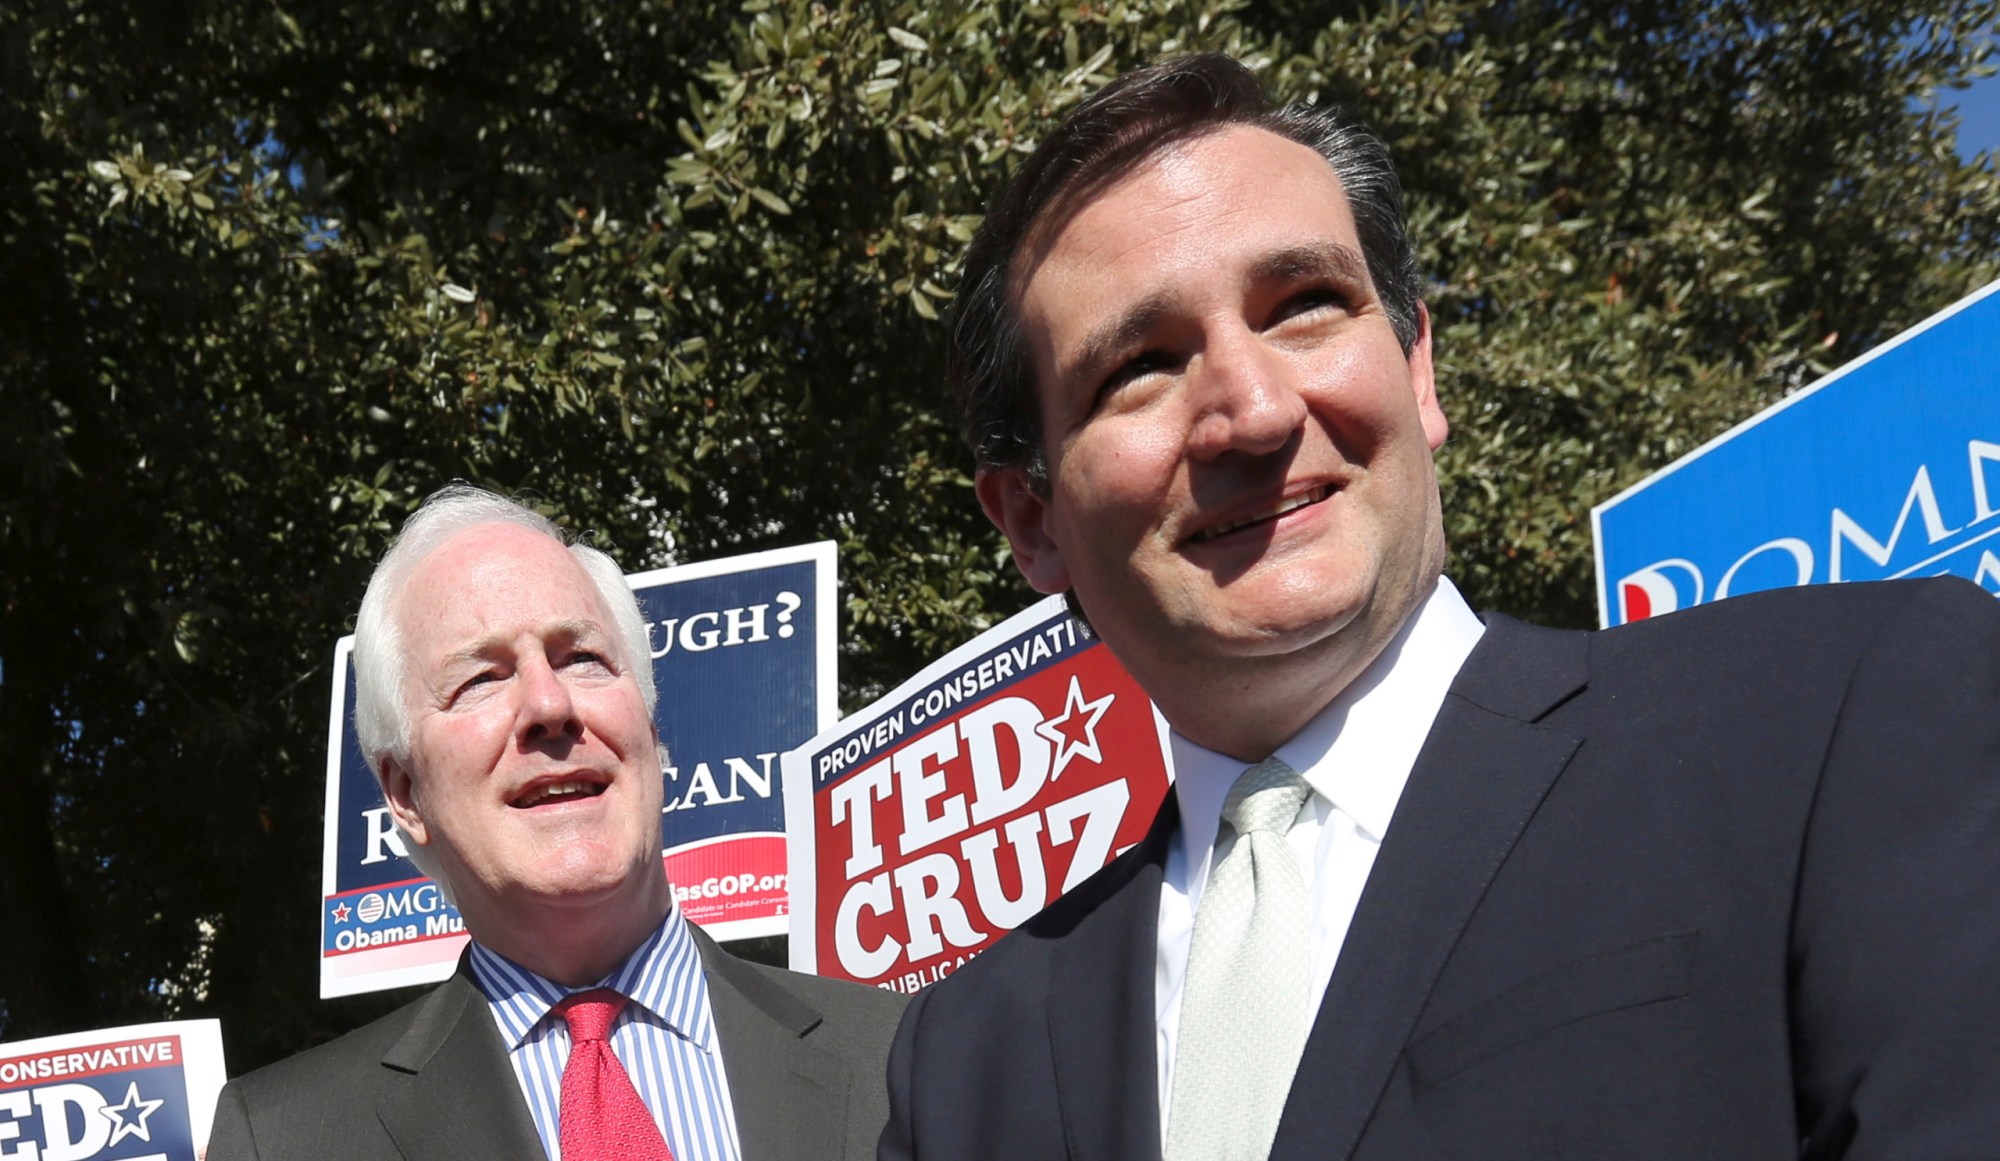 Then-Senate candidate Ted Cruz (R-TX), right, and Sen. John Cornyn (R-TX) listen to a question from reporters outside a polling station in Dallas. (AP/LM Otero)